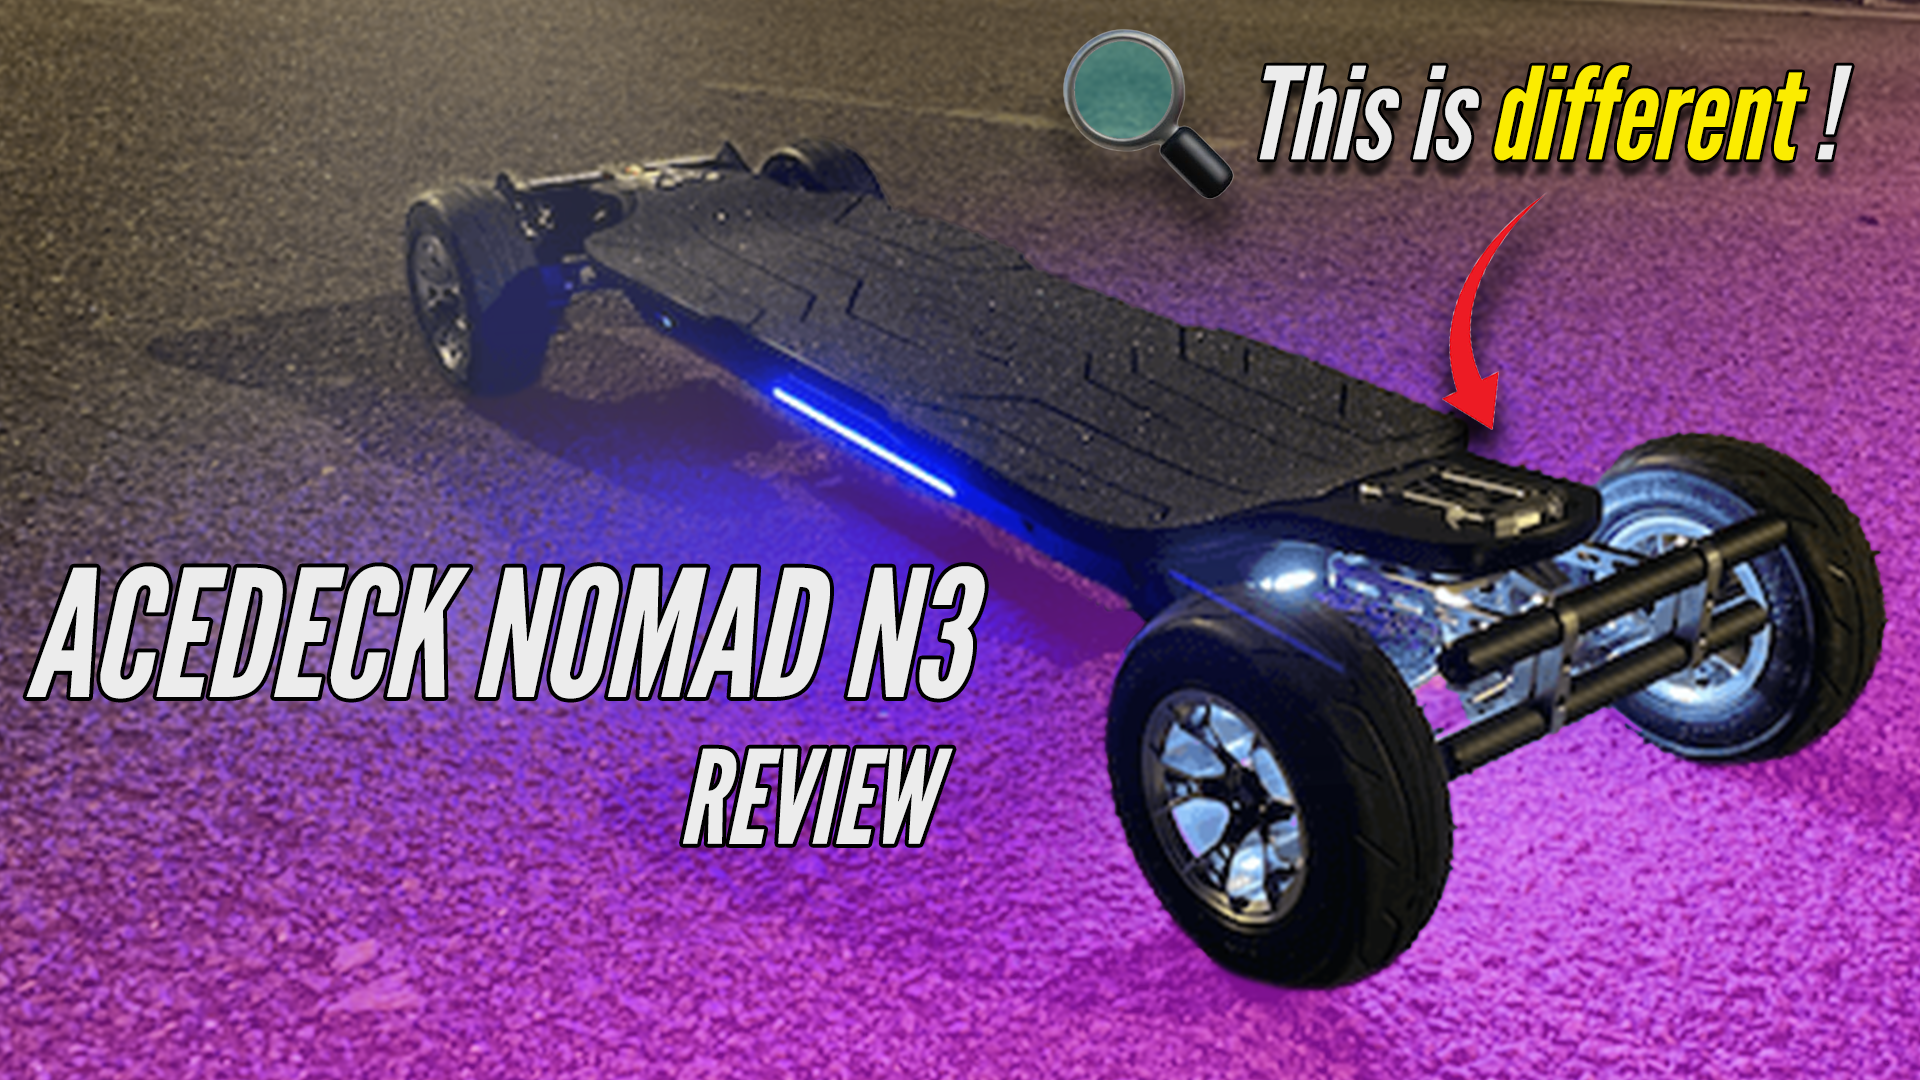 Acedeck Nomad N3 Review – Very Different.